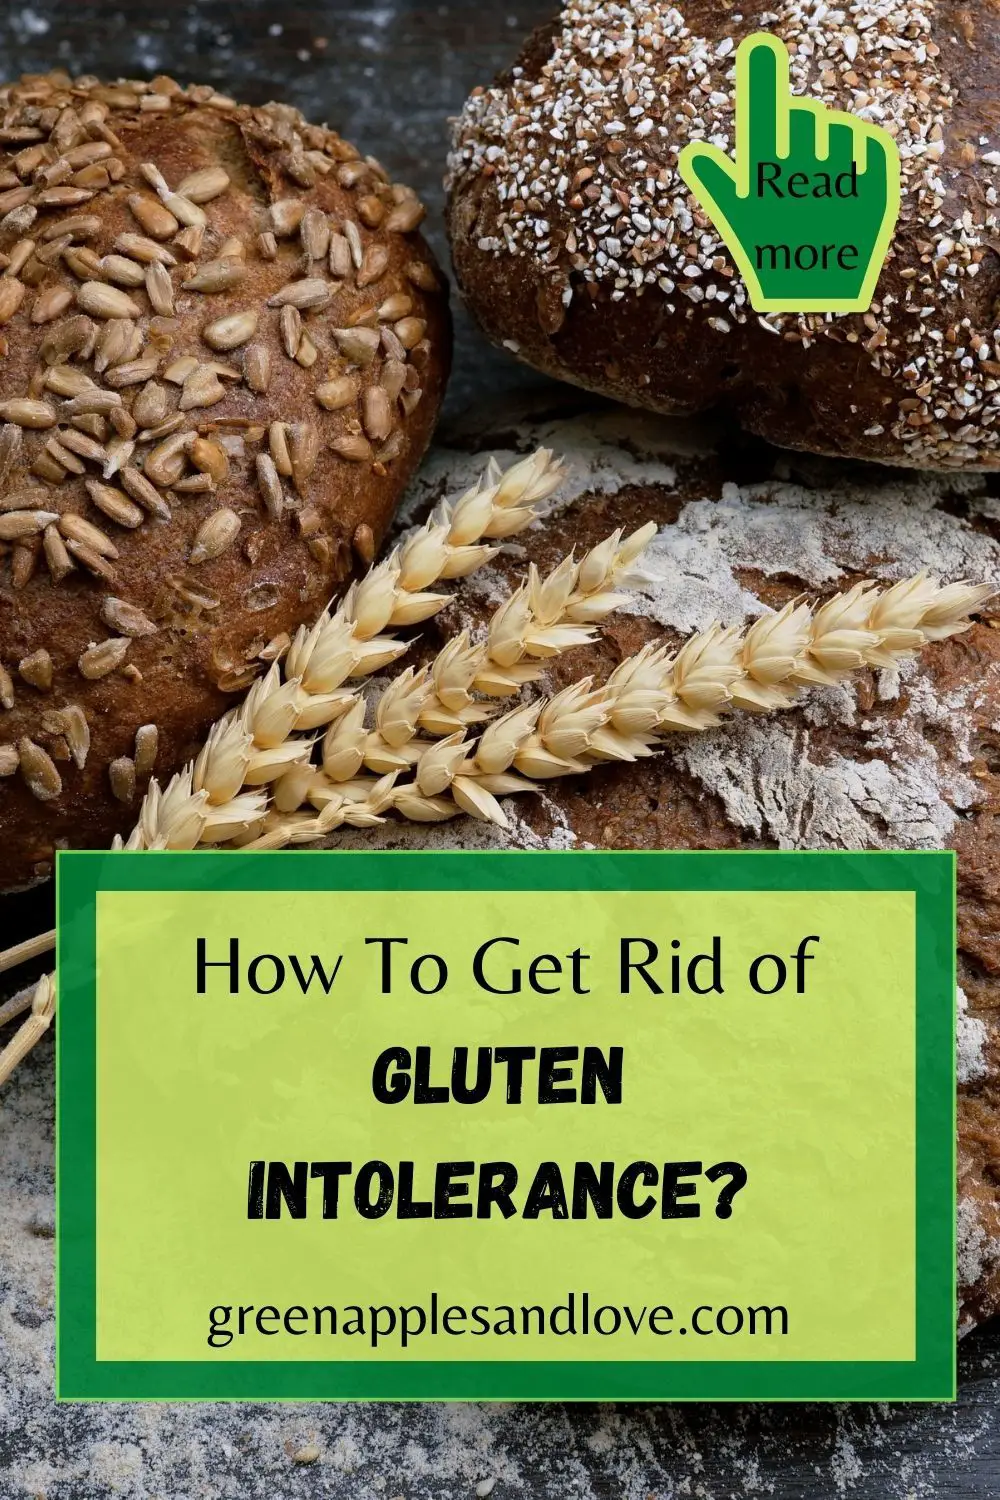 How To Get Rid Of Gluten Intolerance? Step